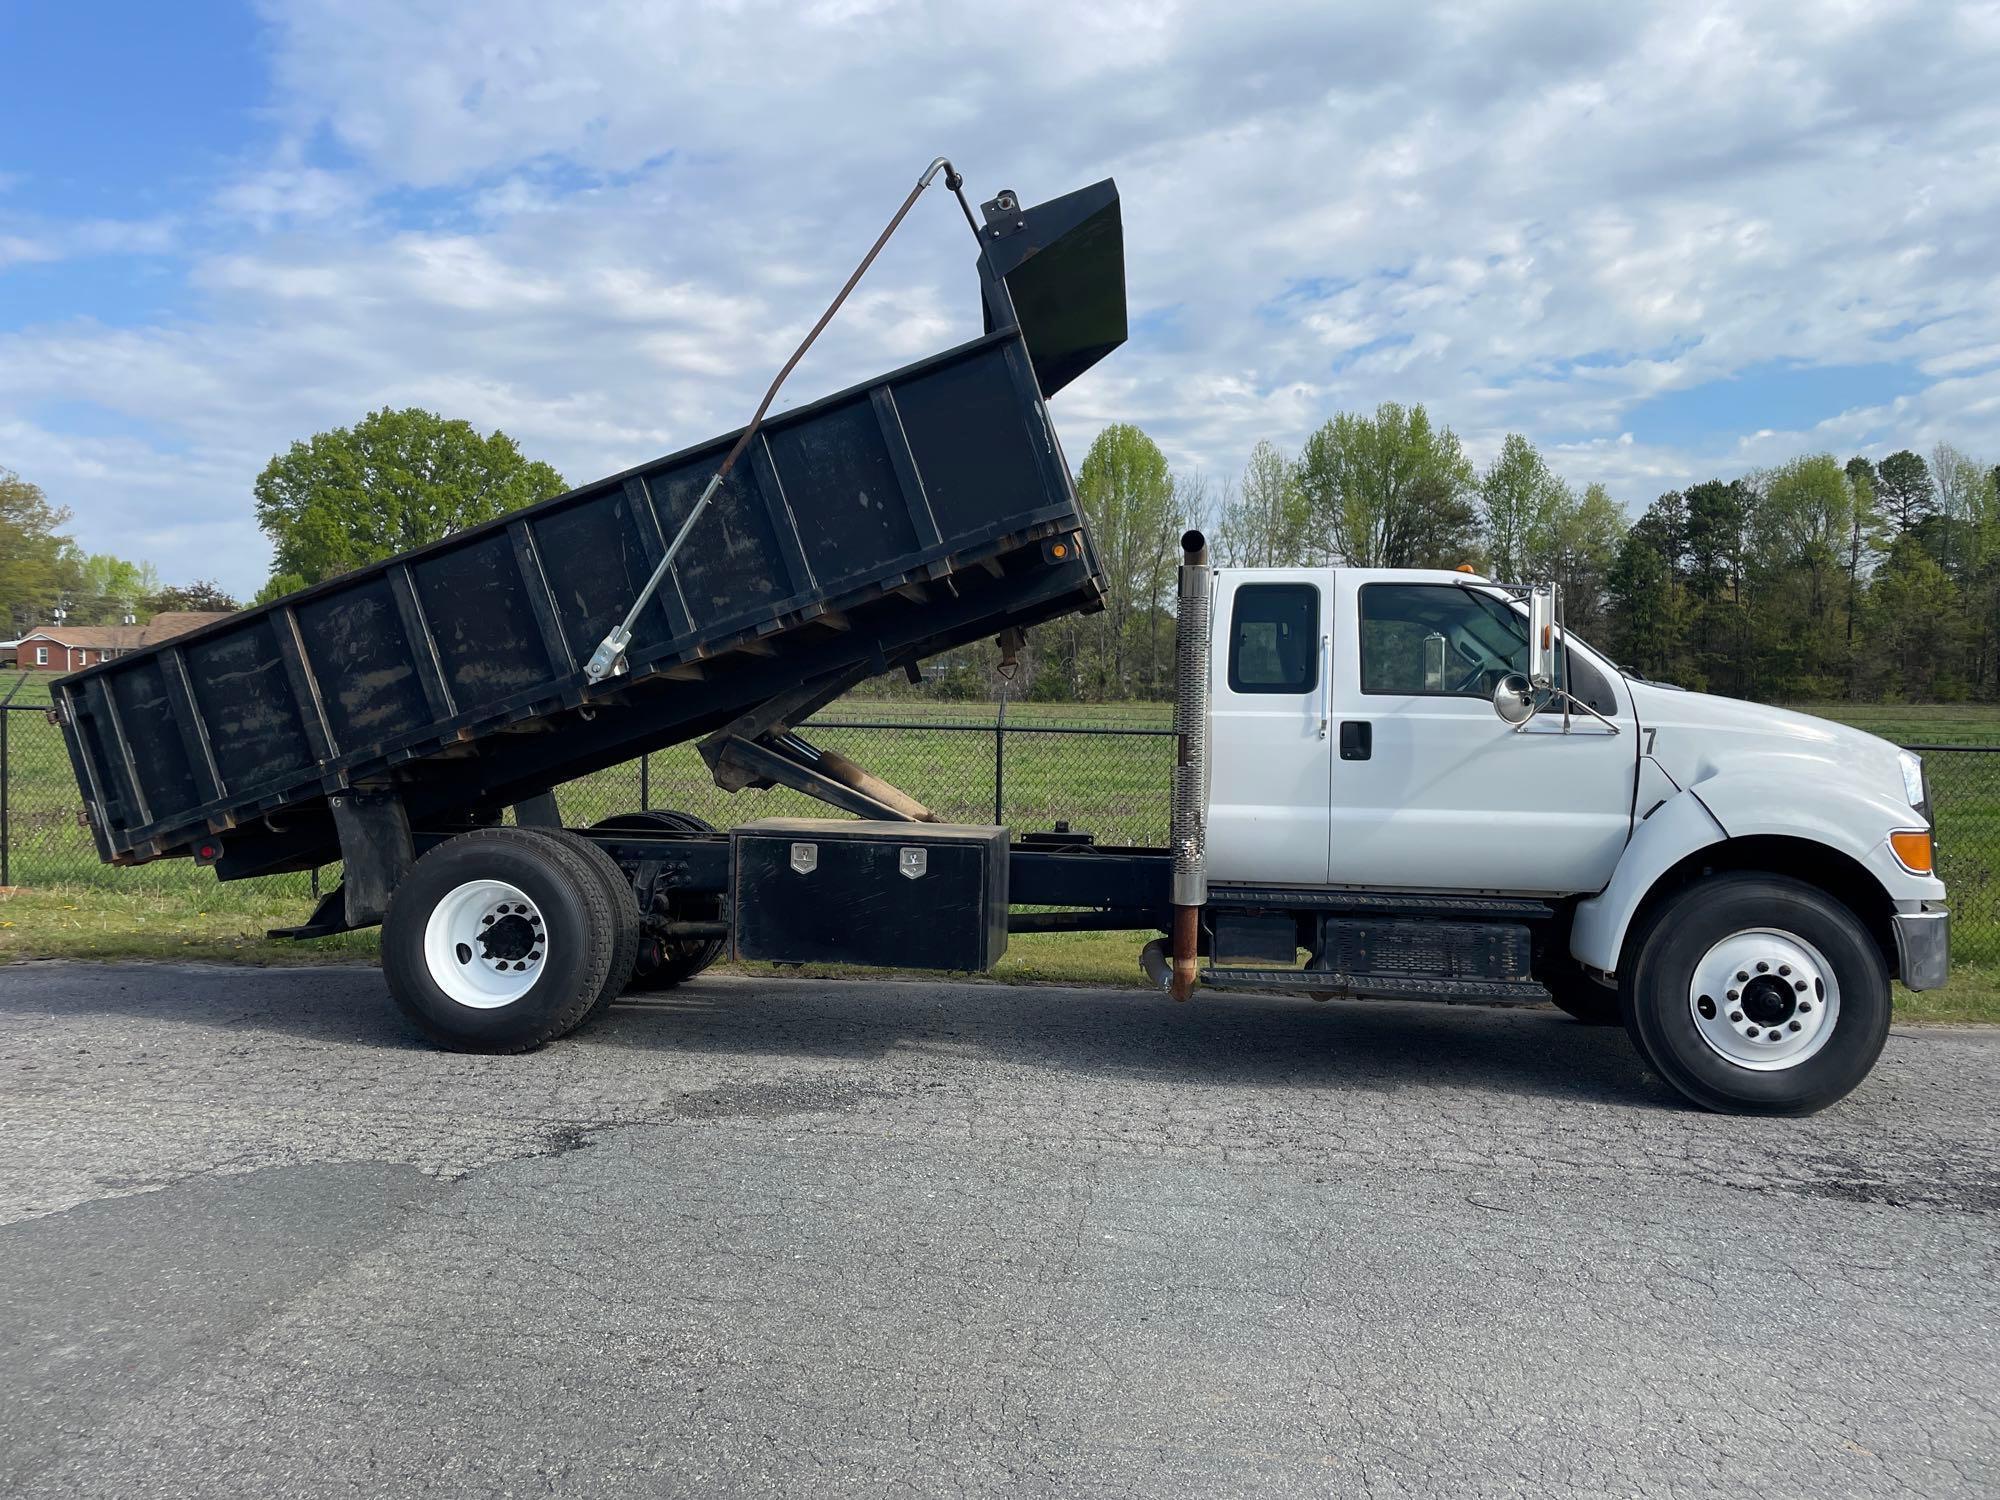 2012 FORD F750 DUMP BODY EXTENDED CAB